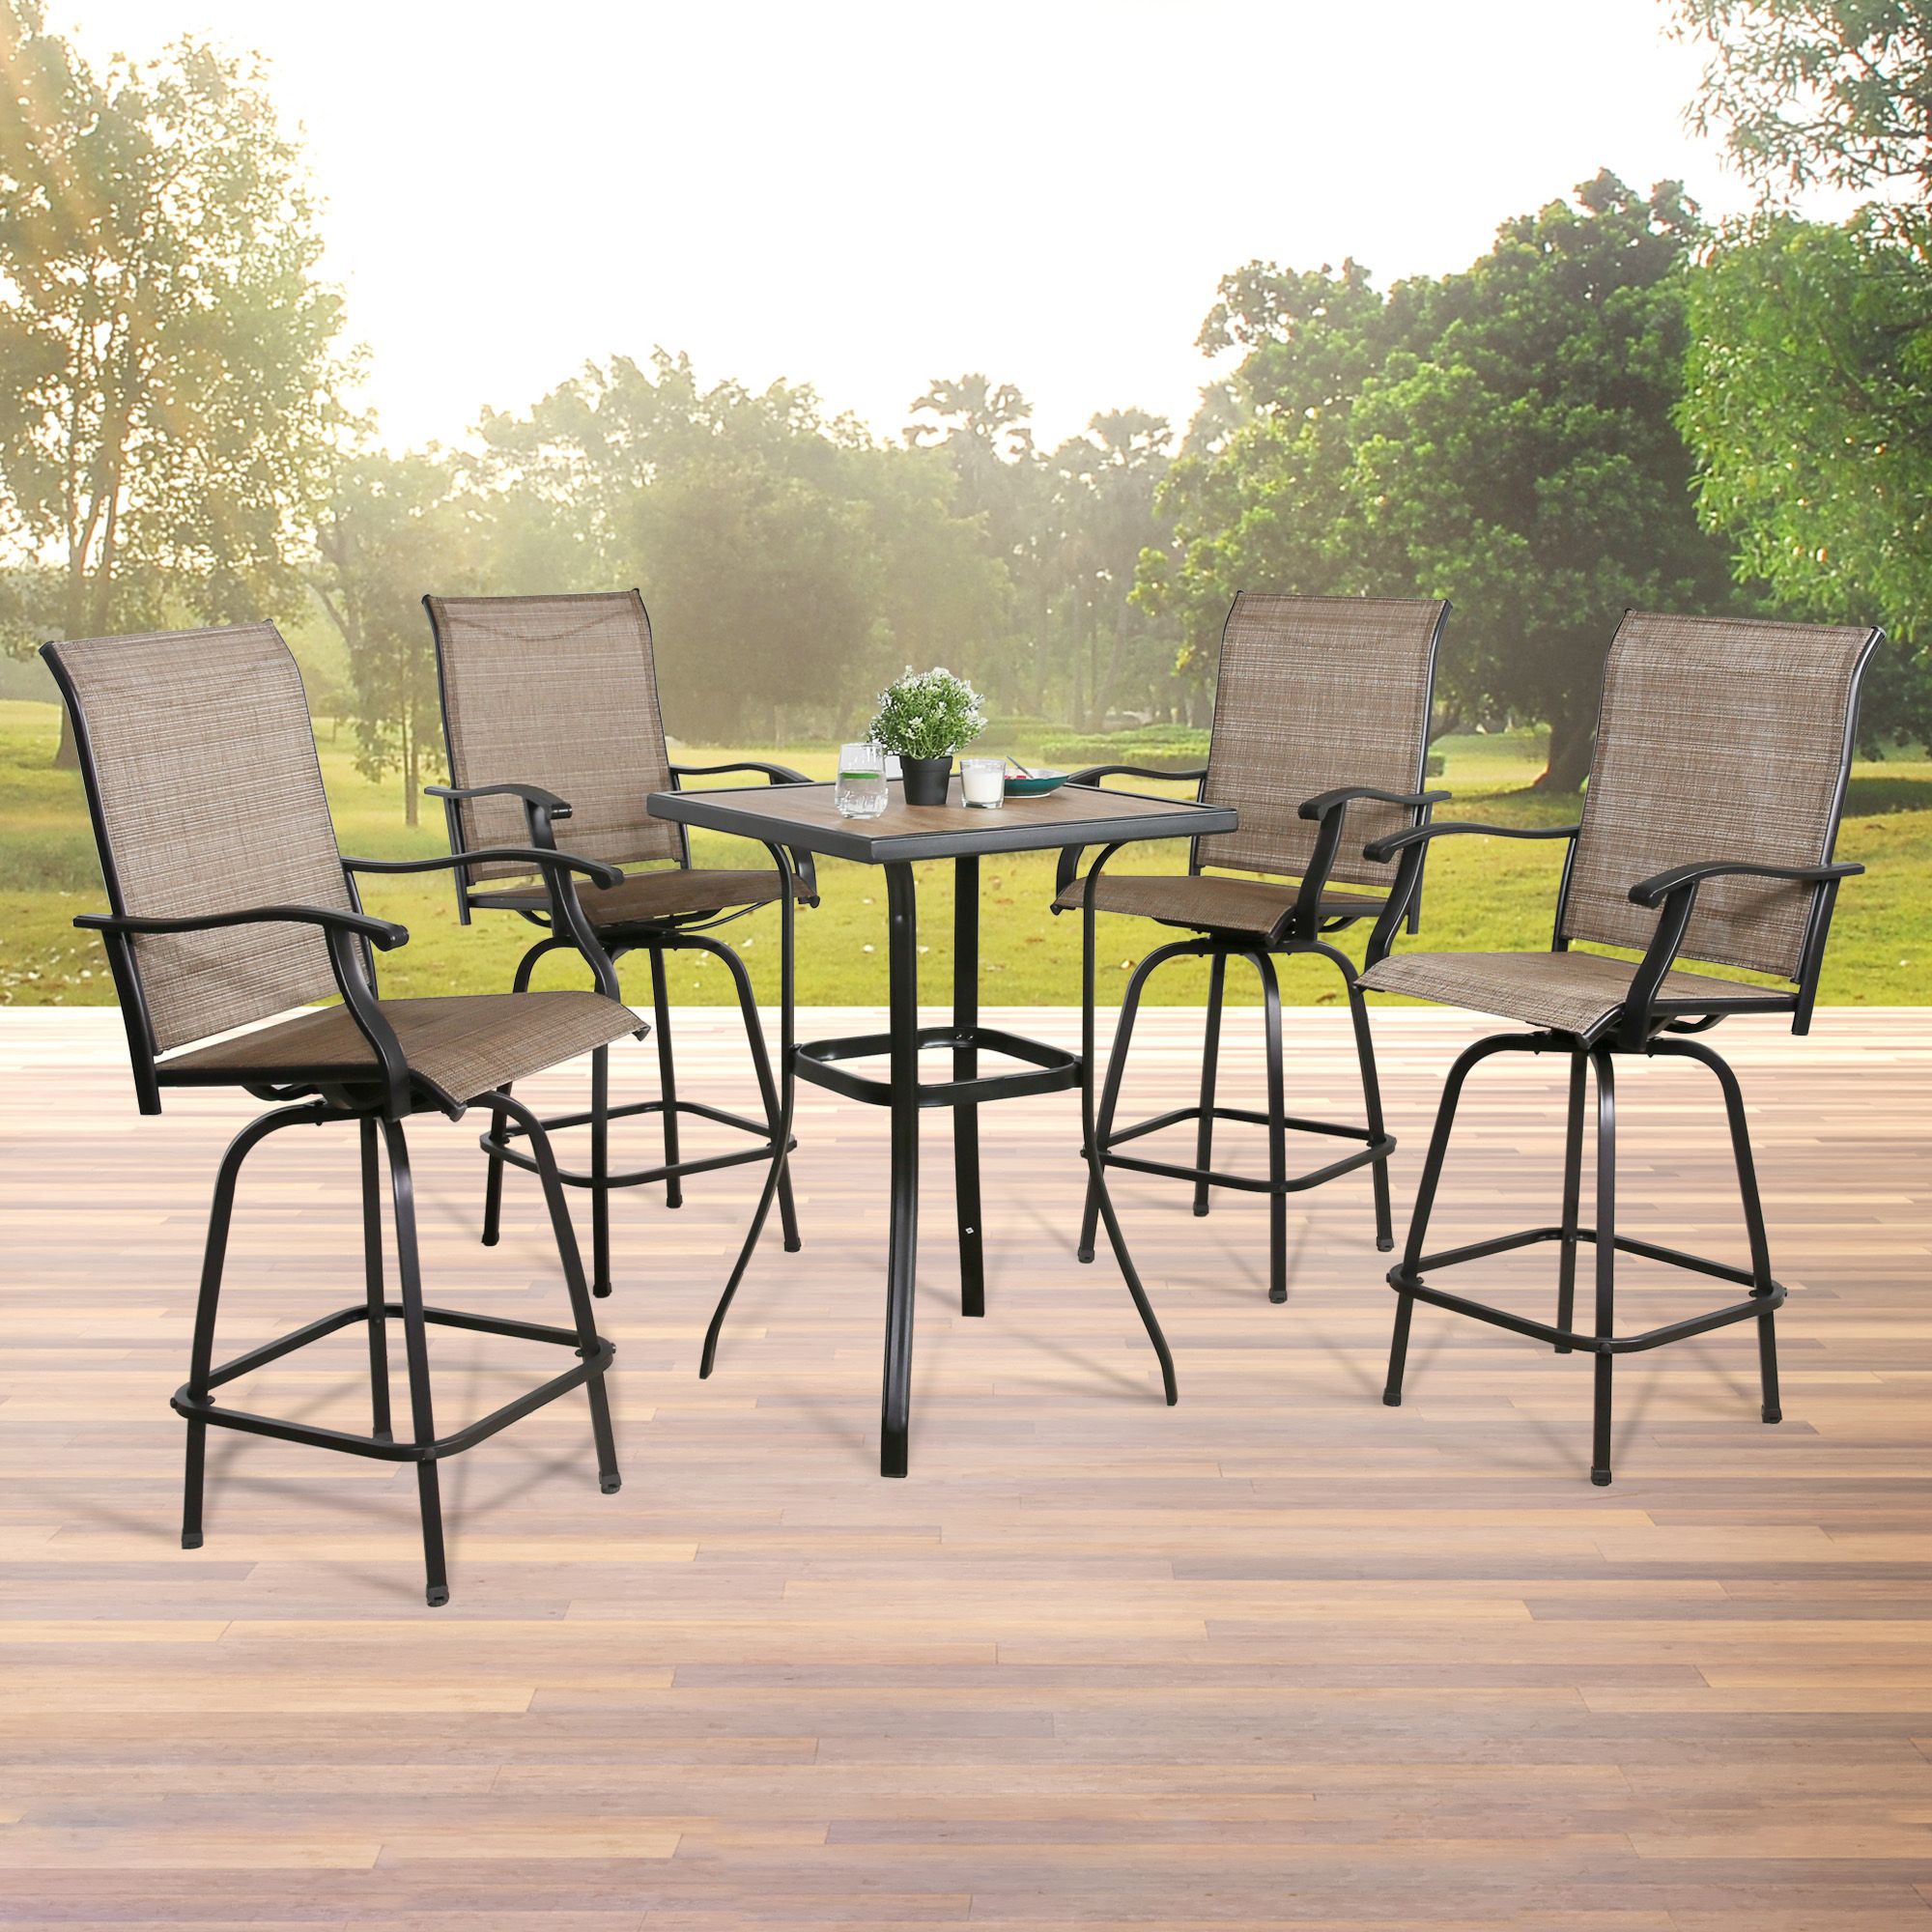 Latest Ulax Furniture 5 Piece Patio Bar Bistro Set Outdoor Furniture Bistro With 5 Piece Outdoor Bar Tables (View 2 of 15)